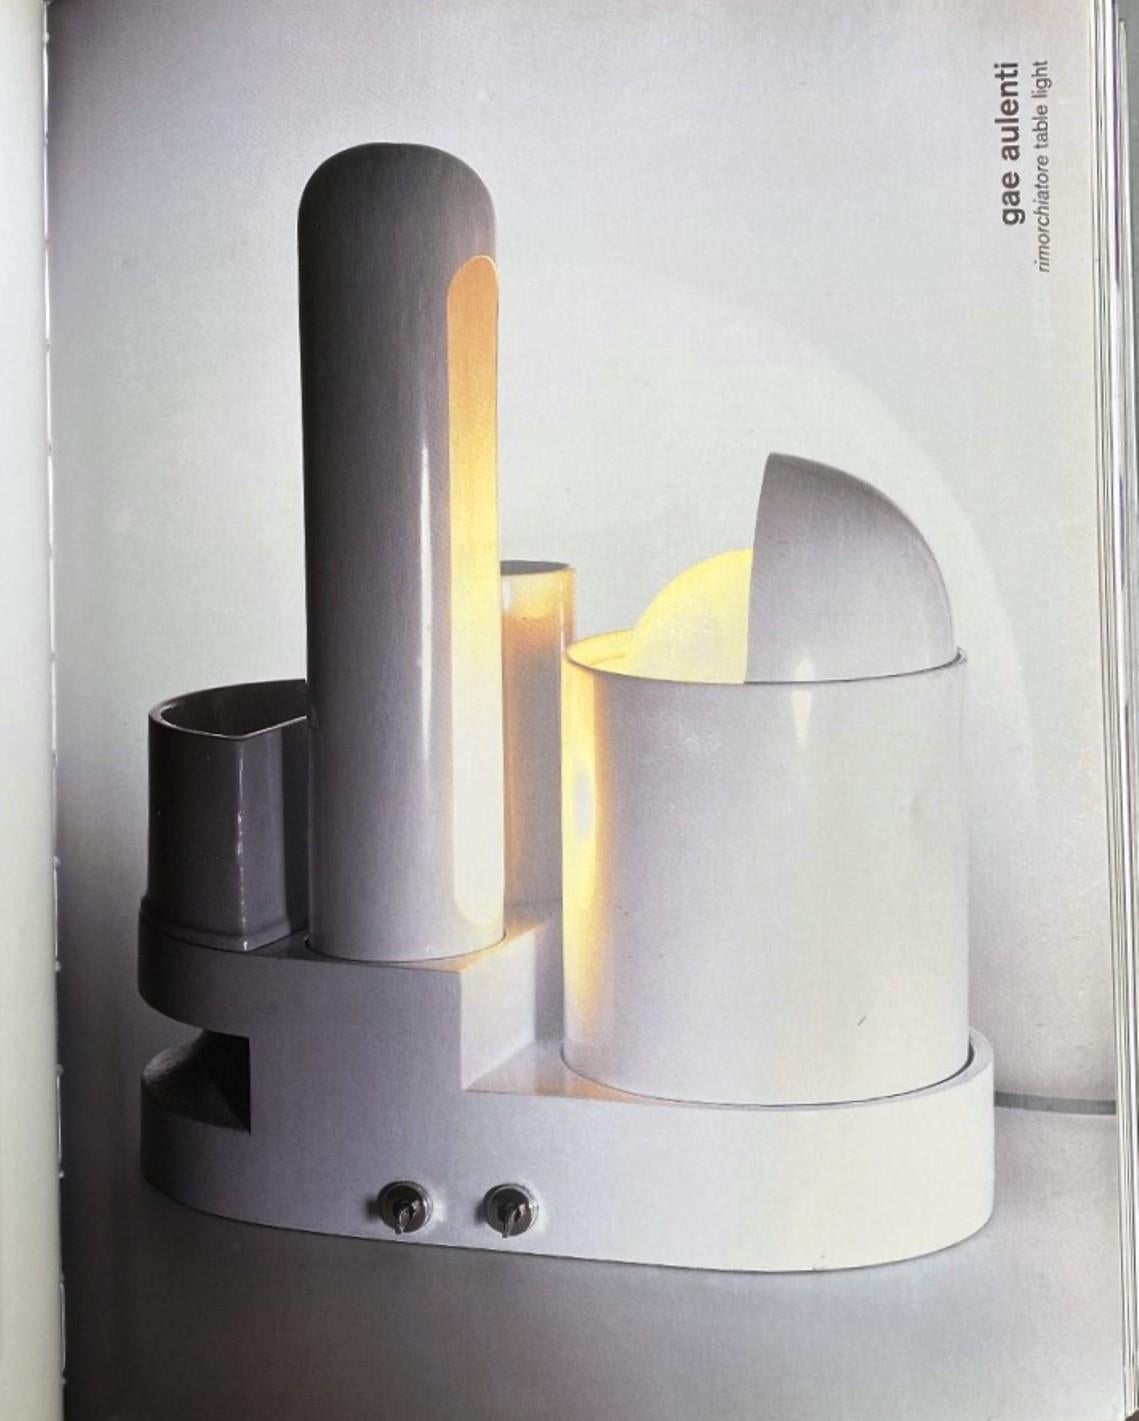 Aluminum Sculptural form 'Rimorchiatore' Table Lamp by Gae Aulenti for Candle, Italy, 1967